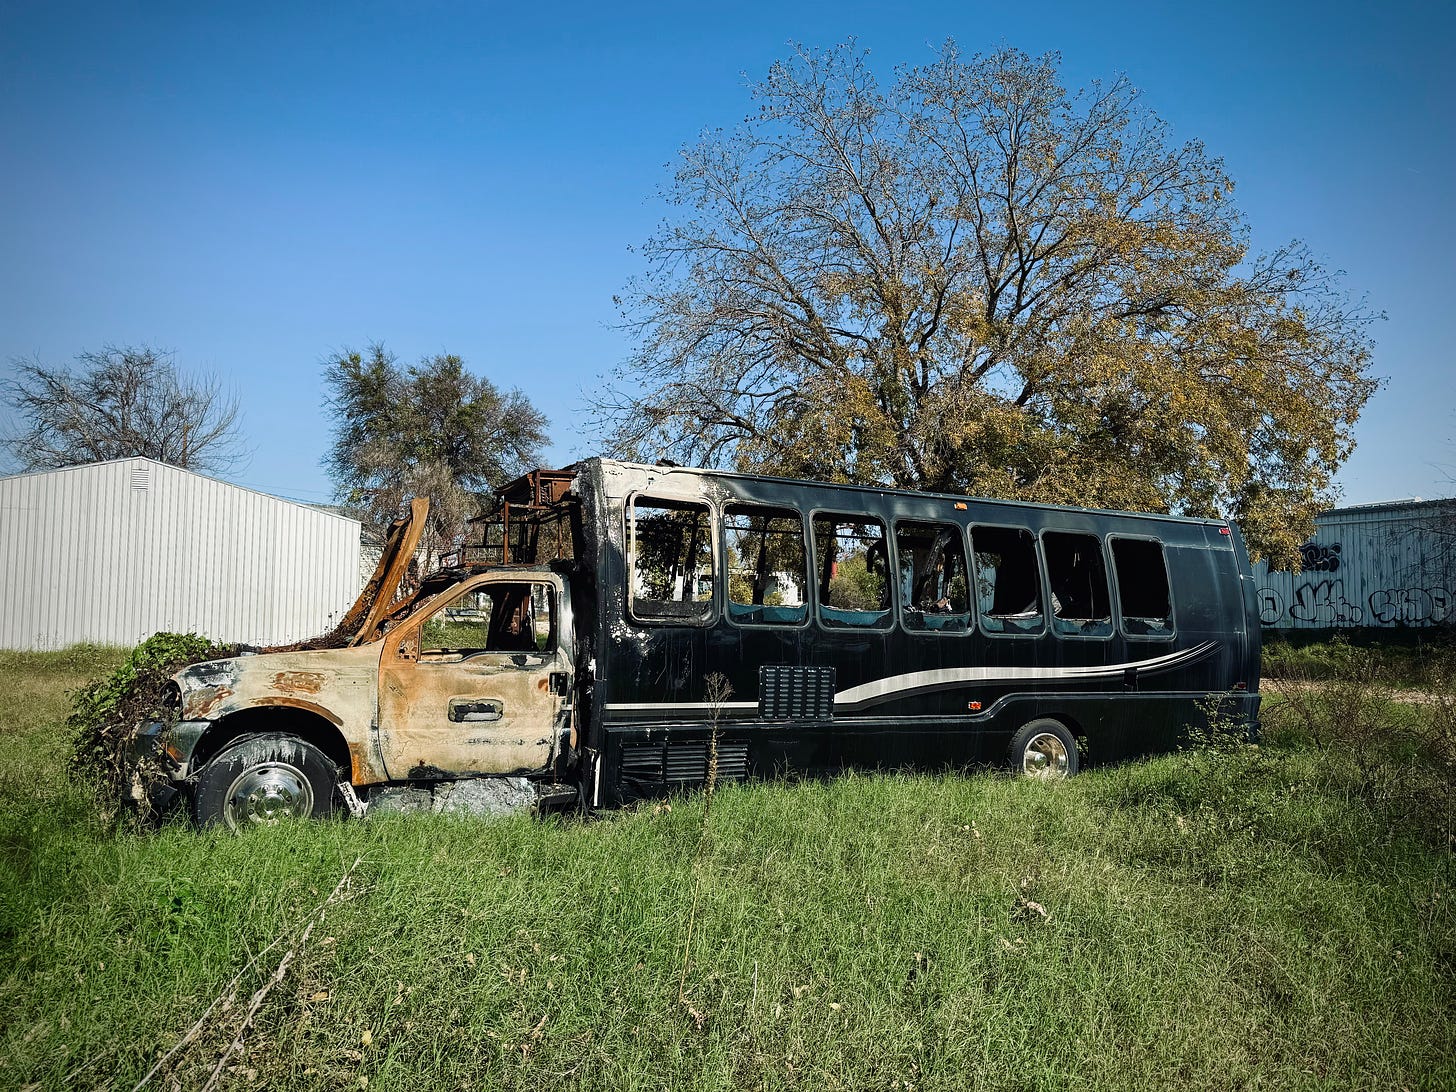 Burned out shuttle bus on an empty lot